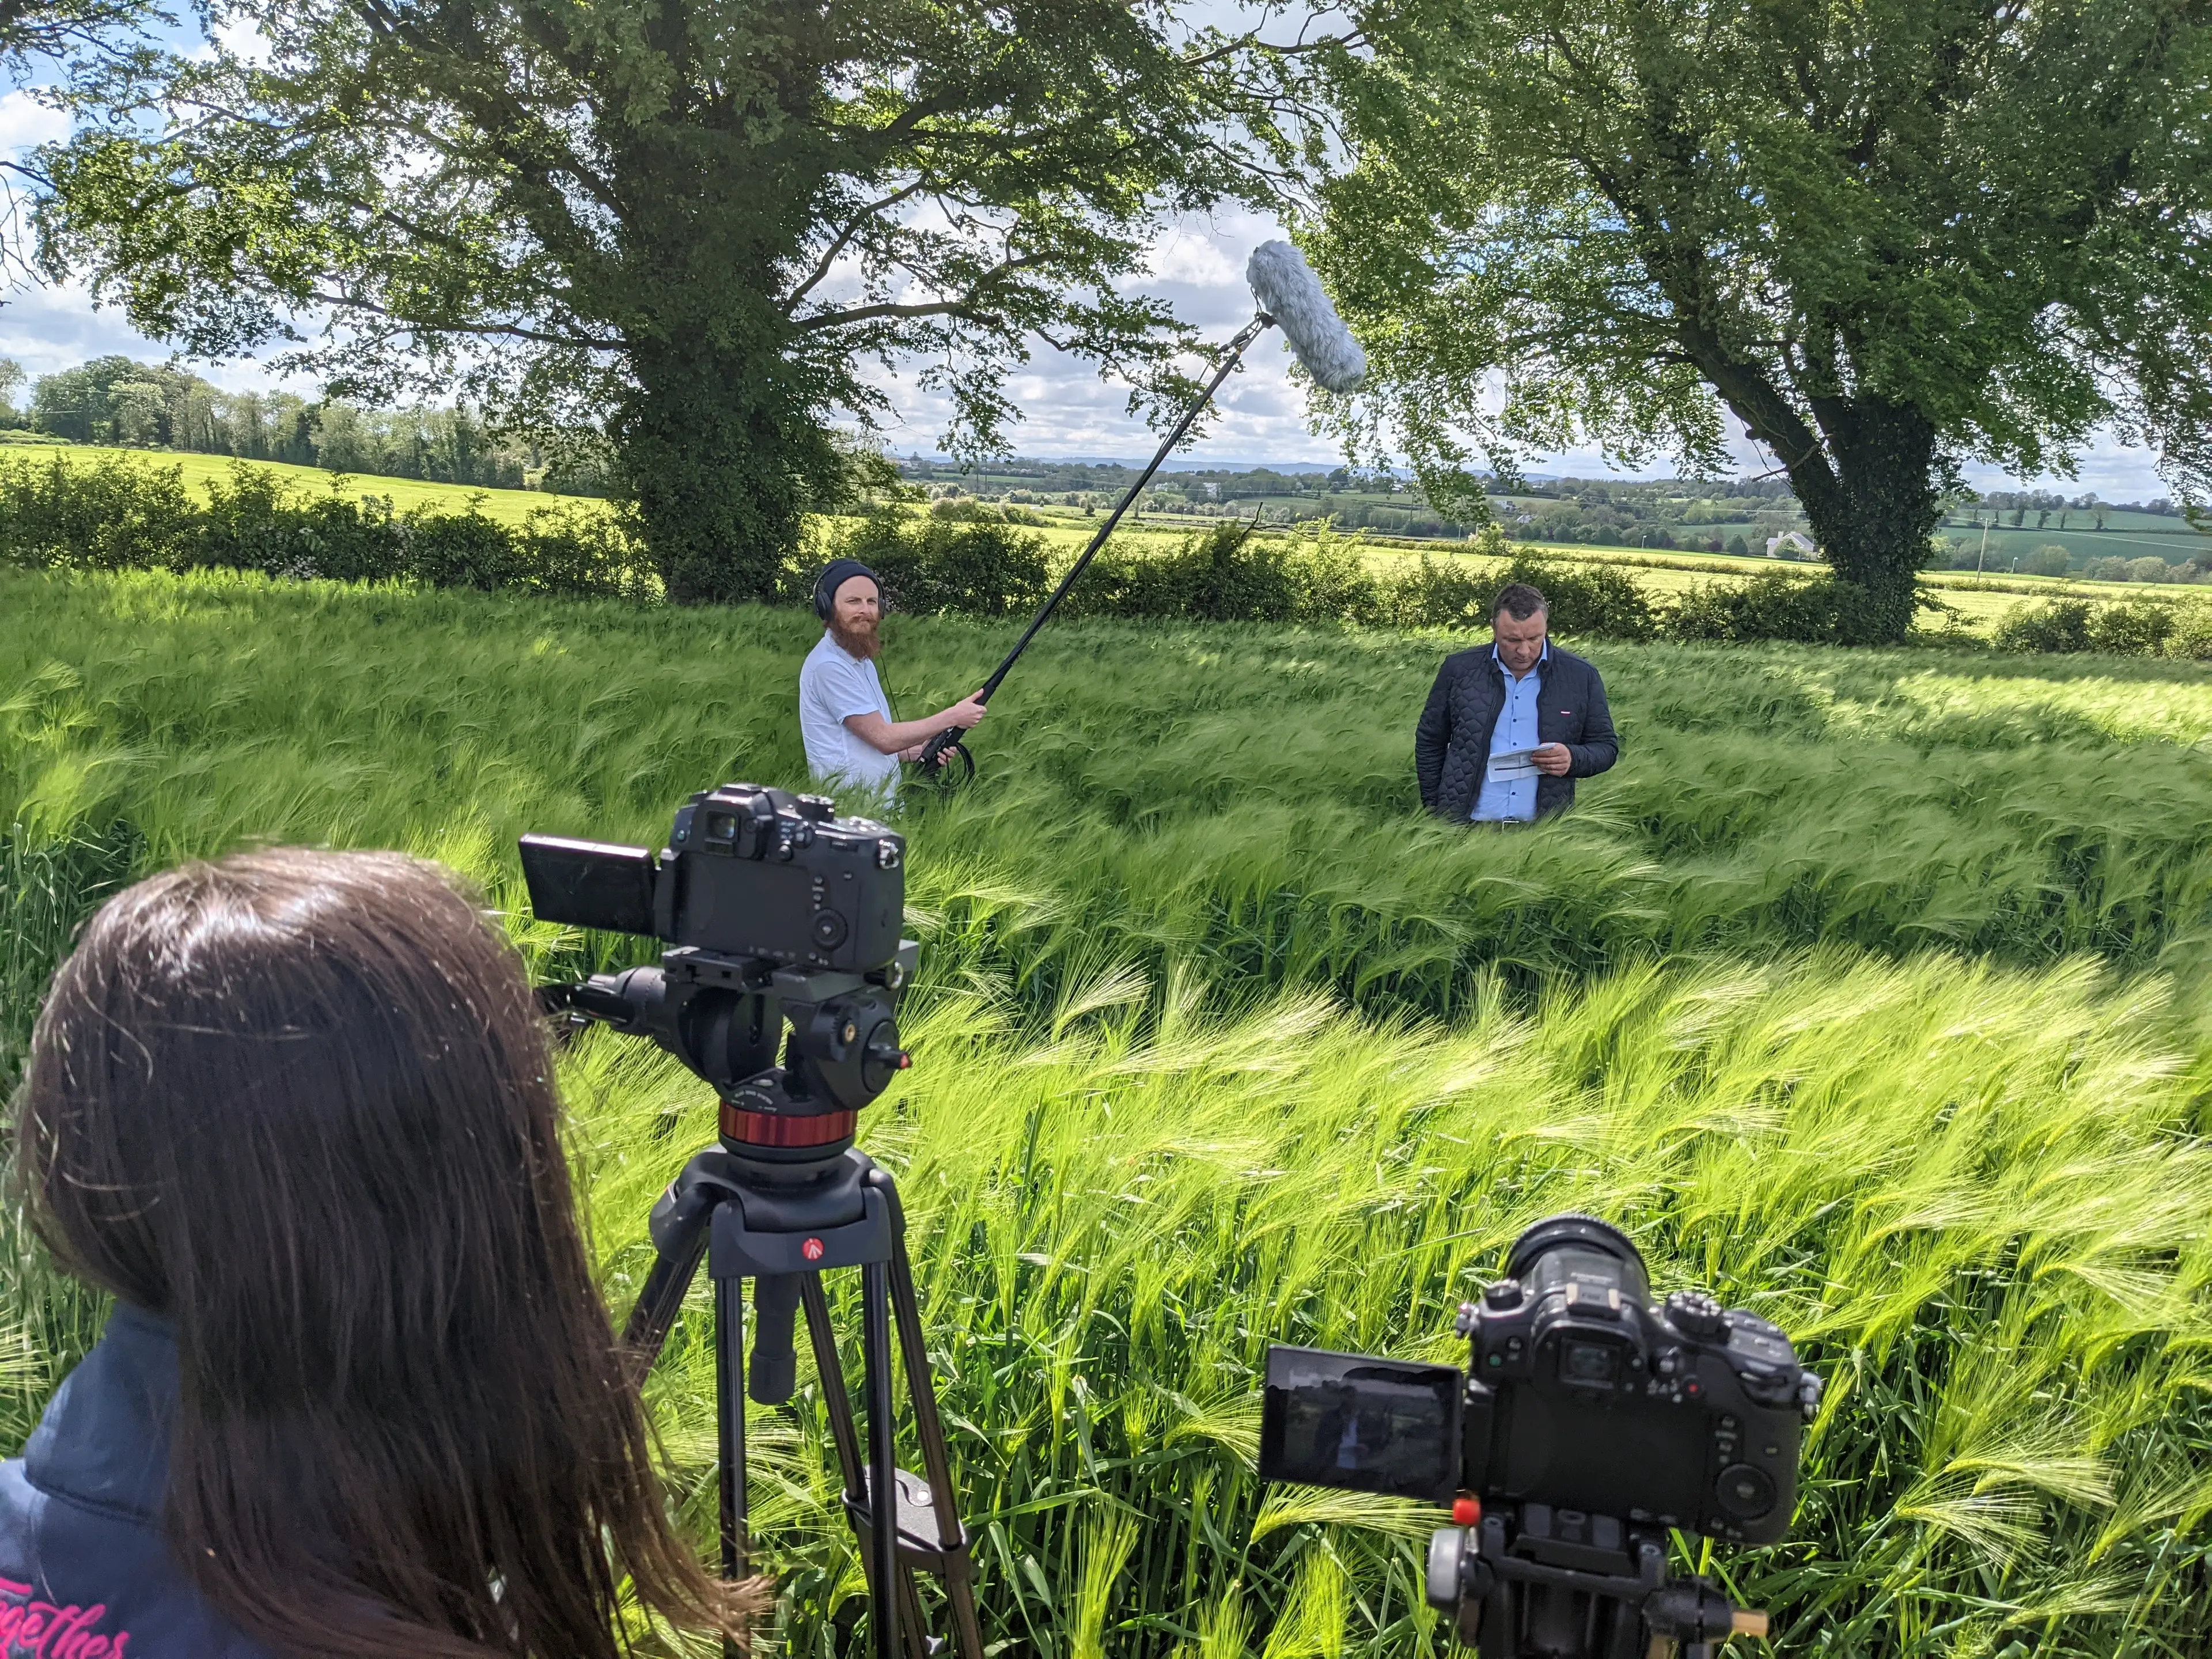 Together Digital Video Team on location in a rural green field setting